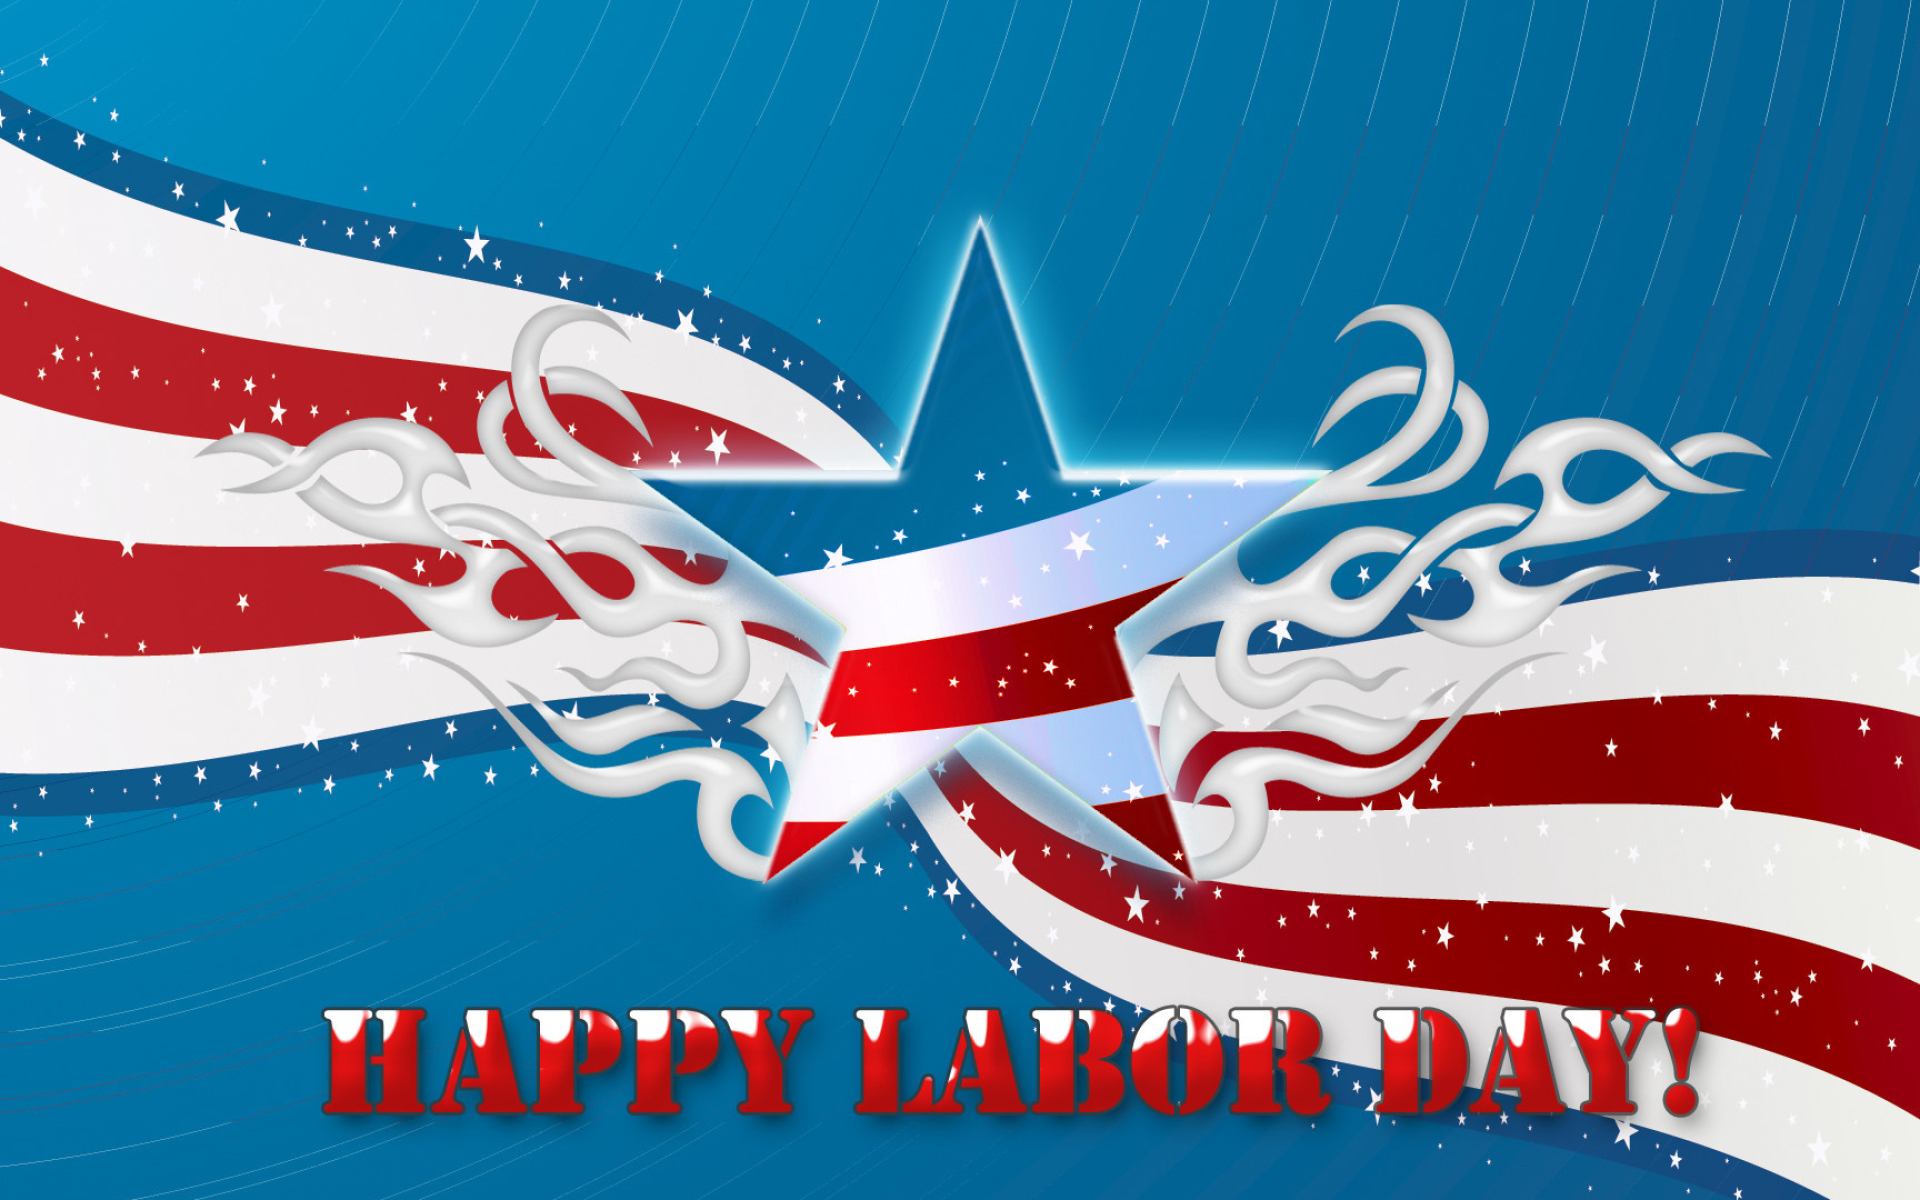 Labor Day Holiday, Labor day wallpaper, 55 pictures, 1920x1200 HD Desktop